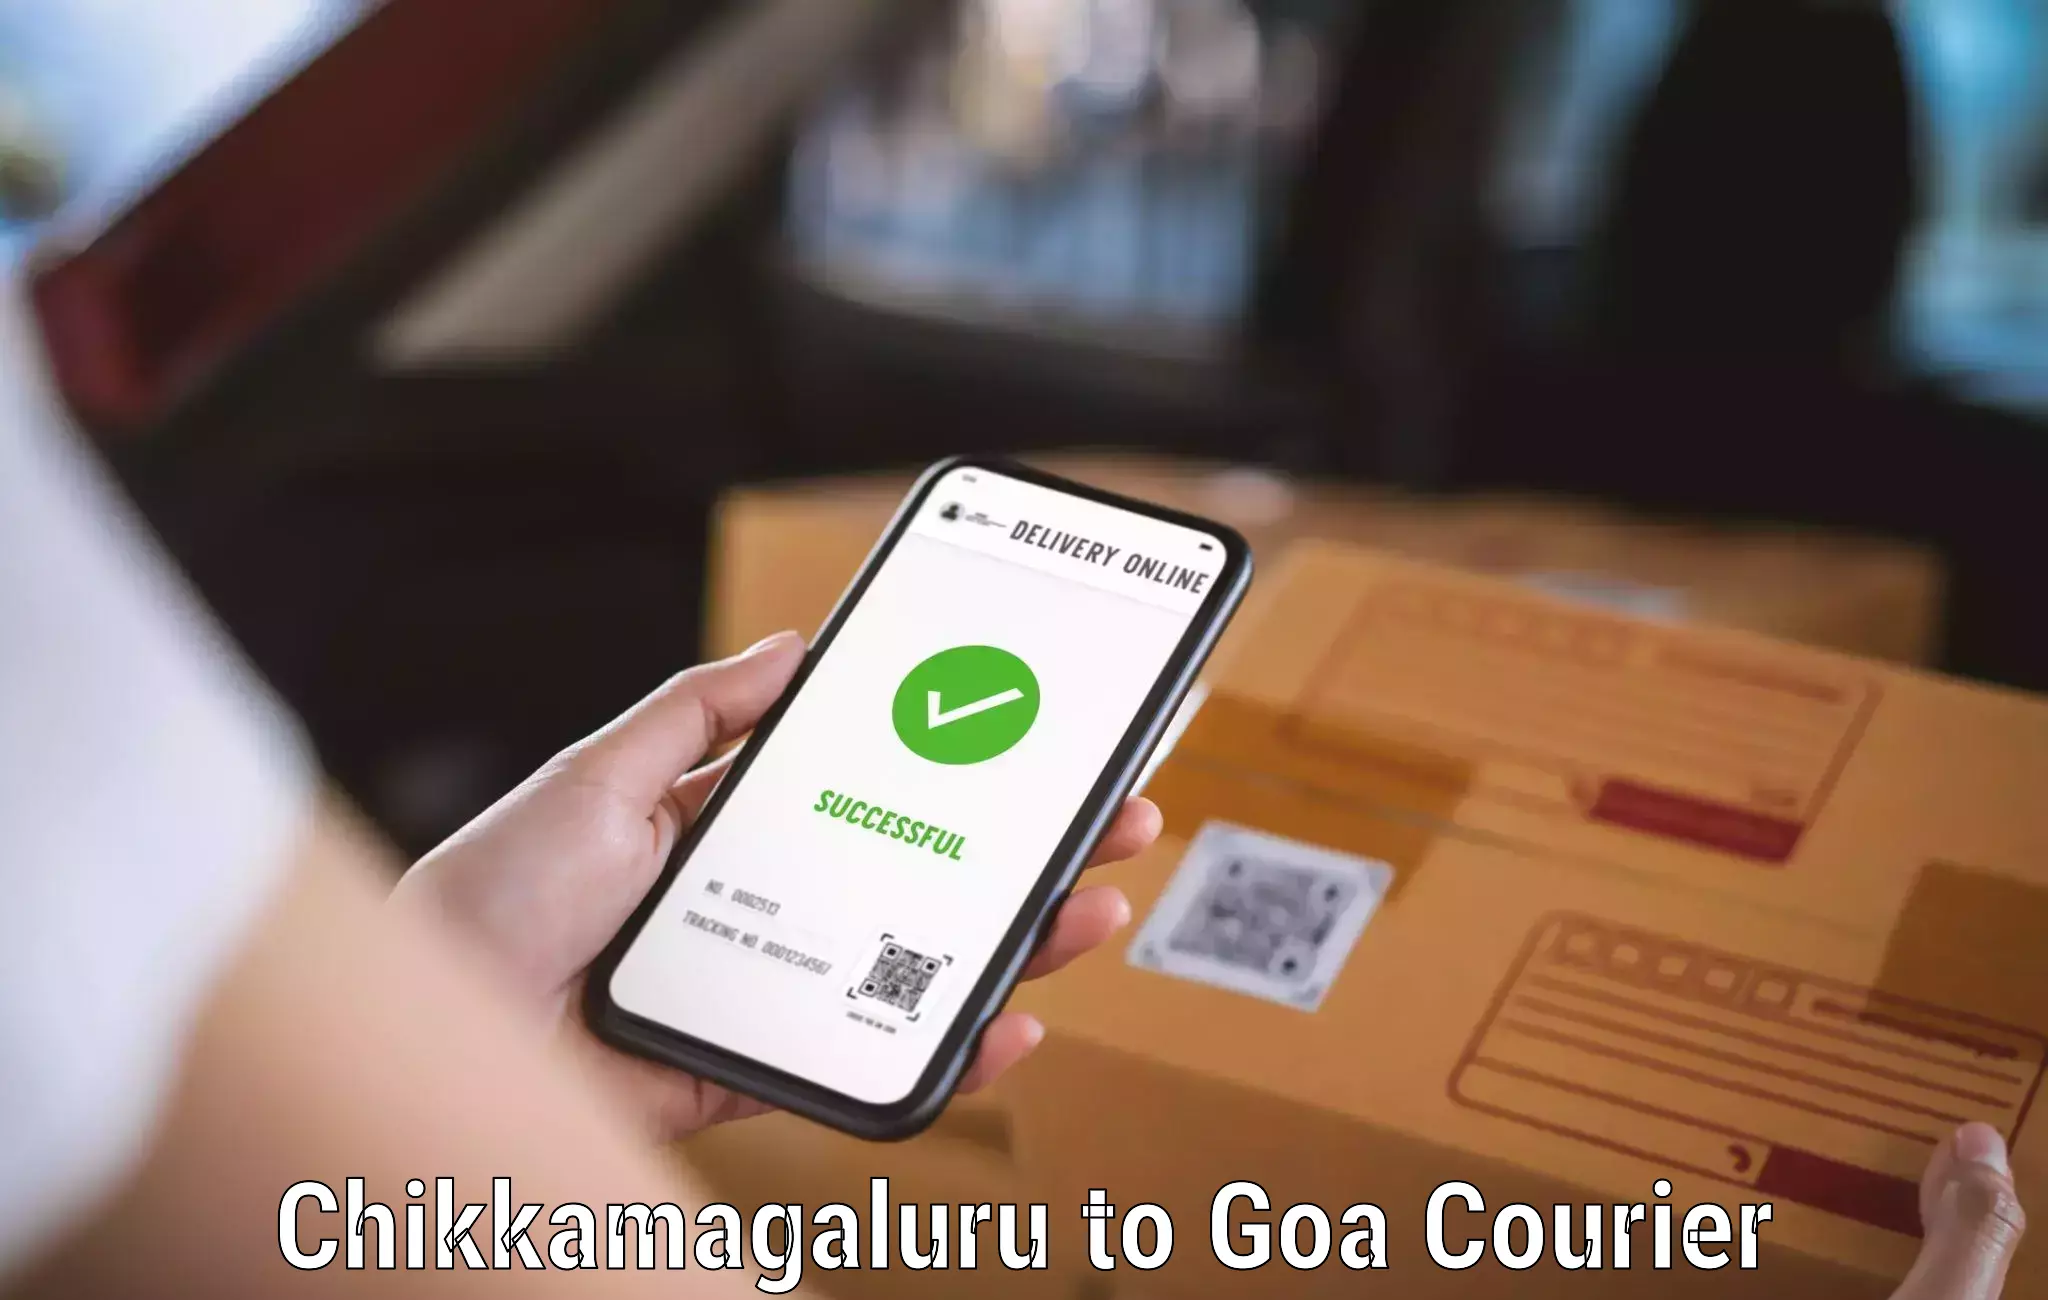 Nationwide parcel services Chikkamagaluru to South Goa